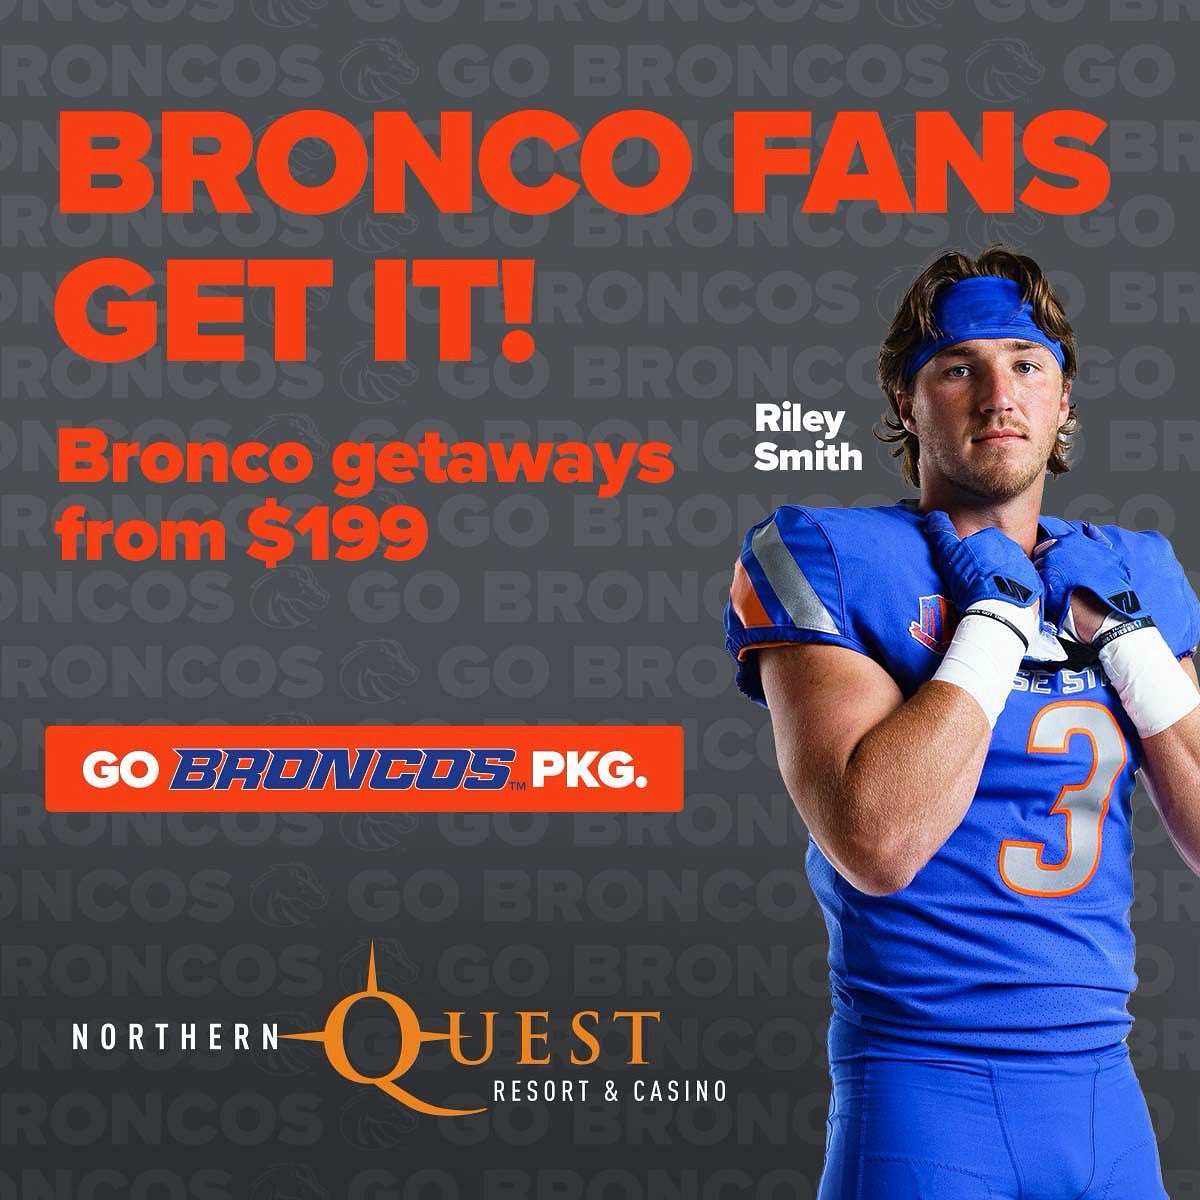 Merry Christmas, Broncos!   Gift an experience at the Northwest’s largest casino resort this season. Northern Quest Resort & Casino offers gaming, entertainment, a luxury hotel, and more in Spokane, WA. Shop gift cards online or book a getaway with the Go Broncos Package.